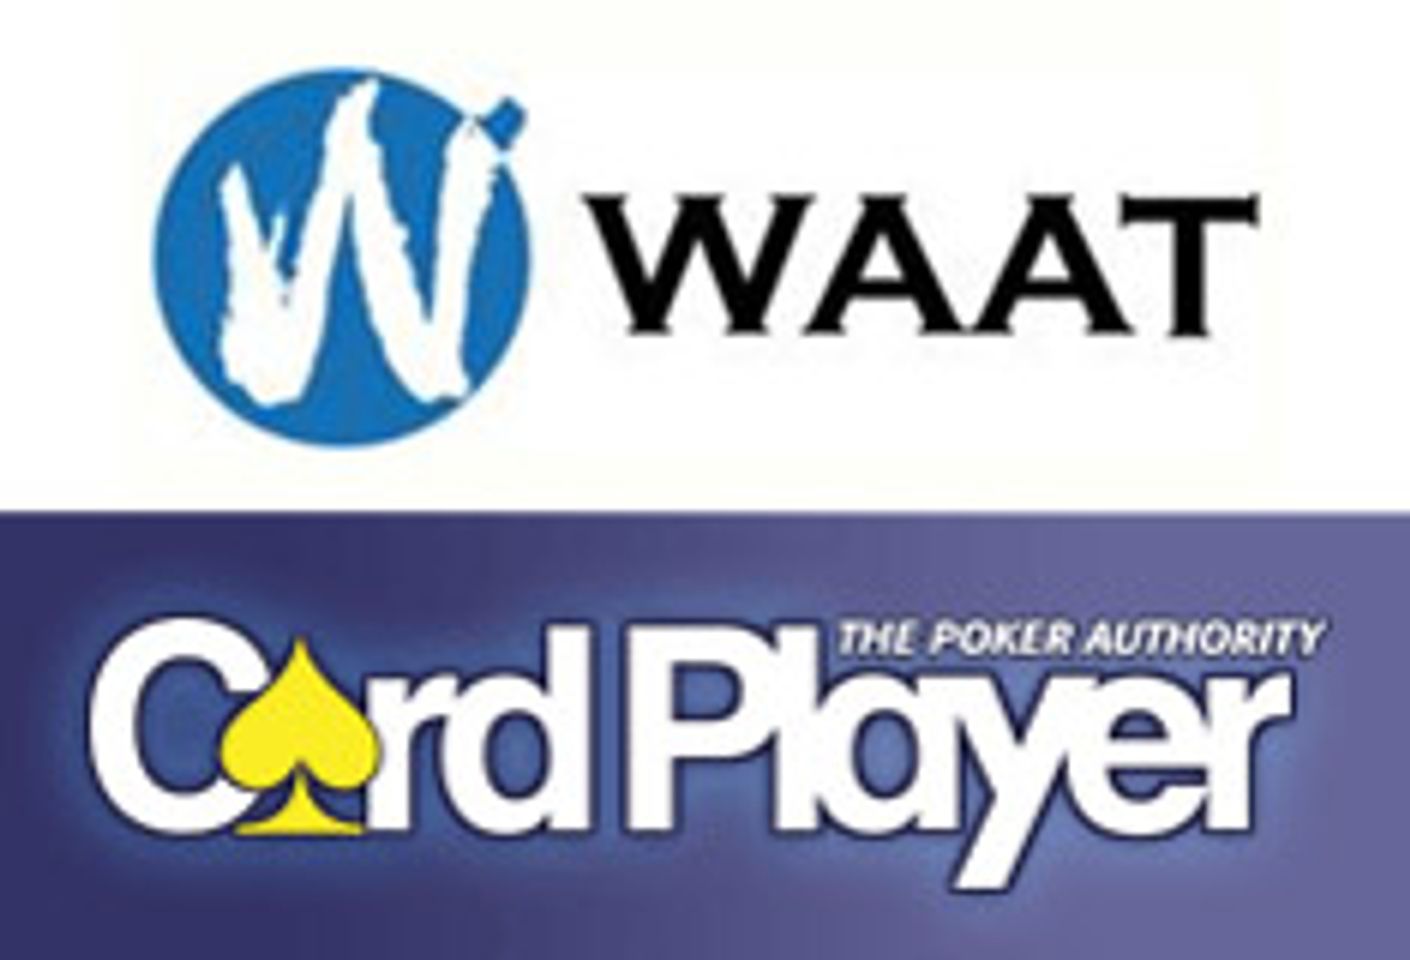 WAAT and Card Player Launch Mobile Poker